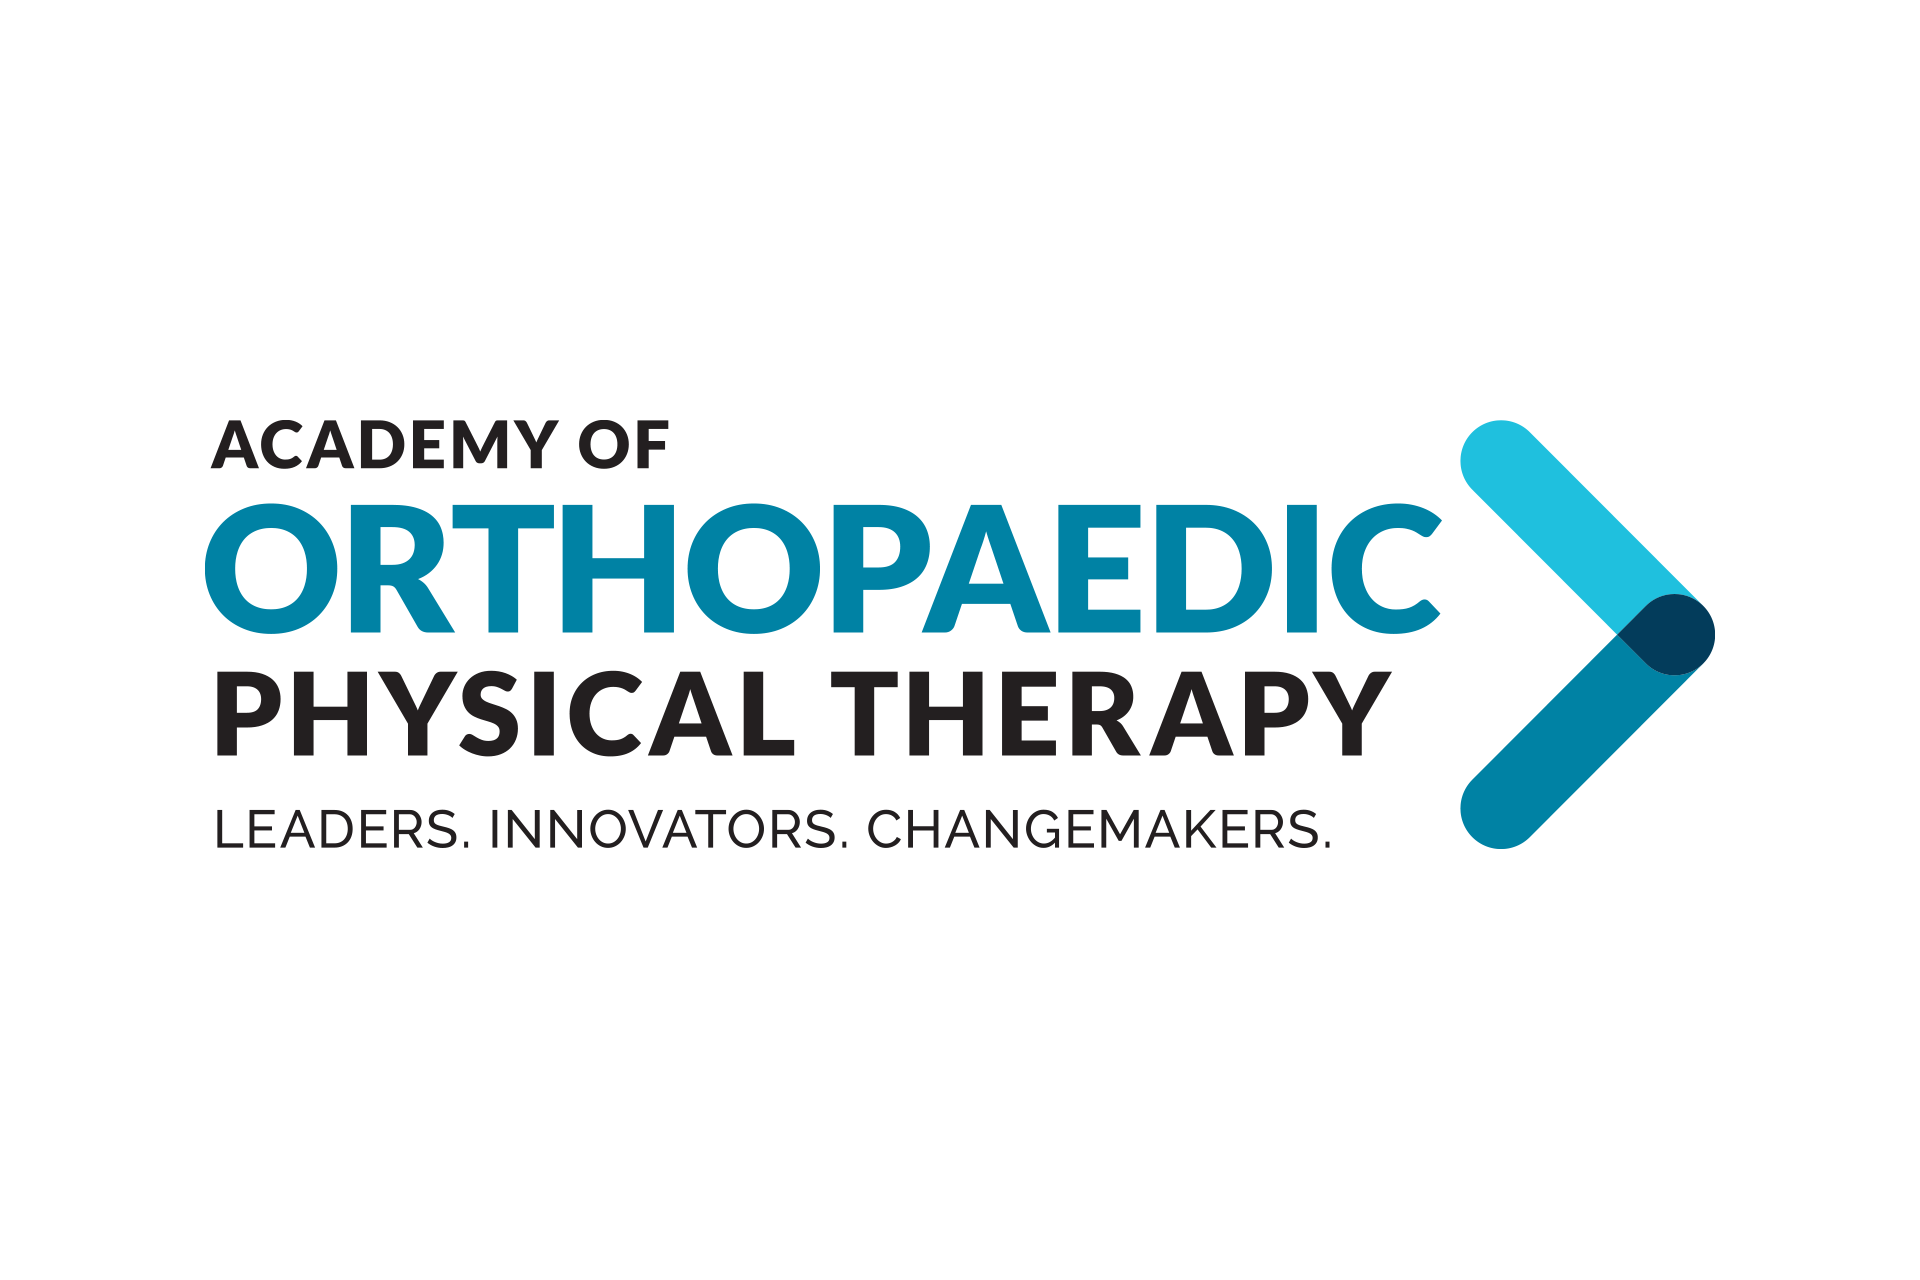 Academy of Orthopaedic Physical Therapy color logo created by Vendi Advertising